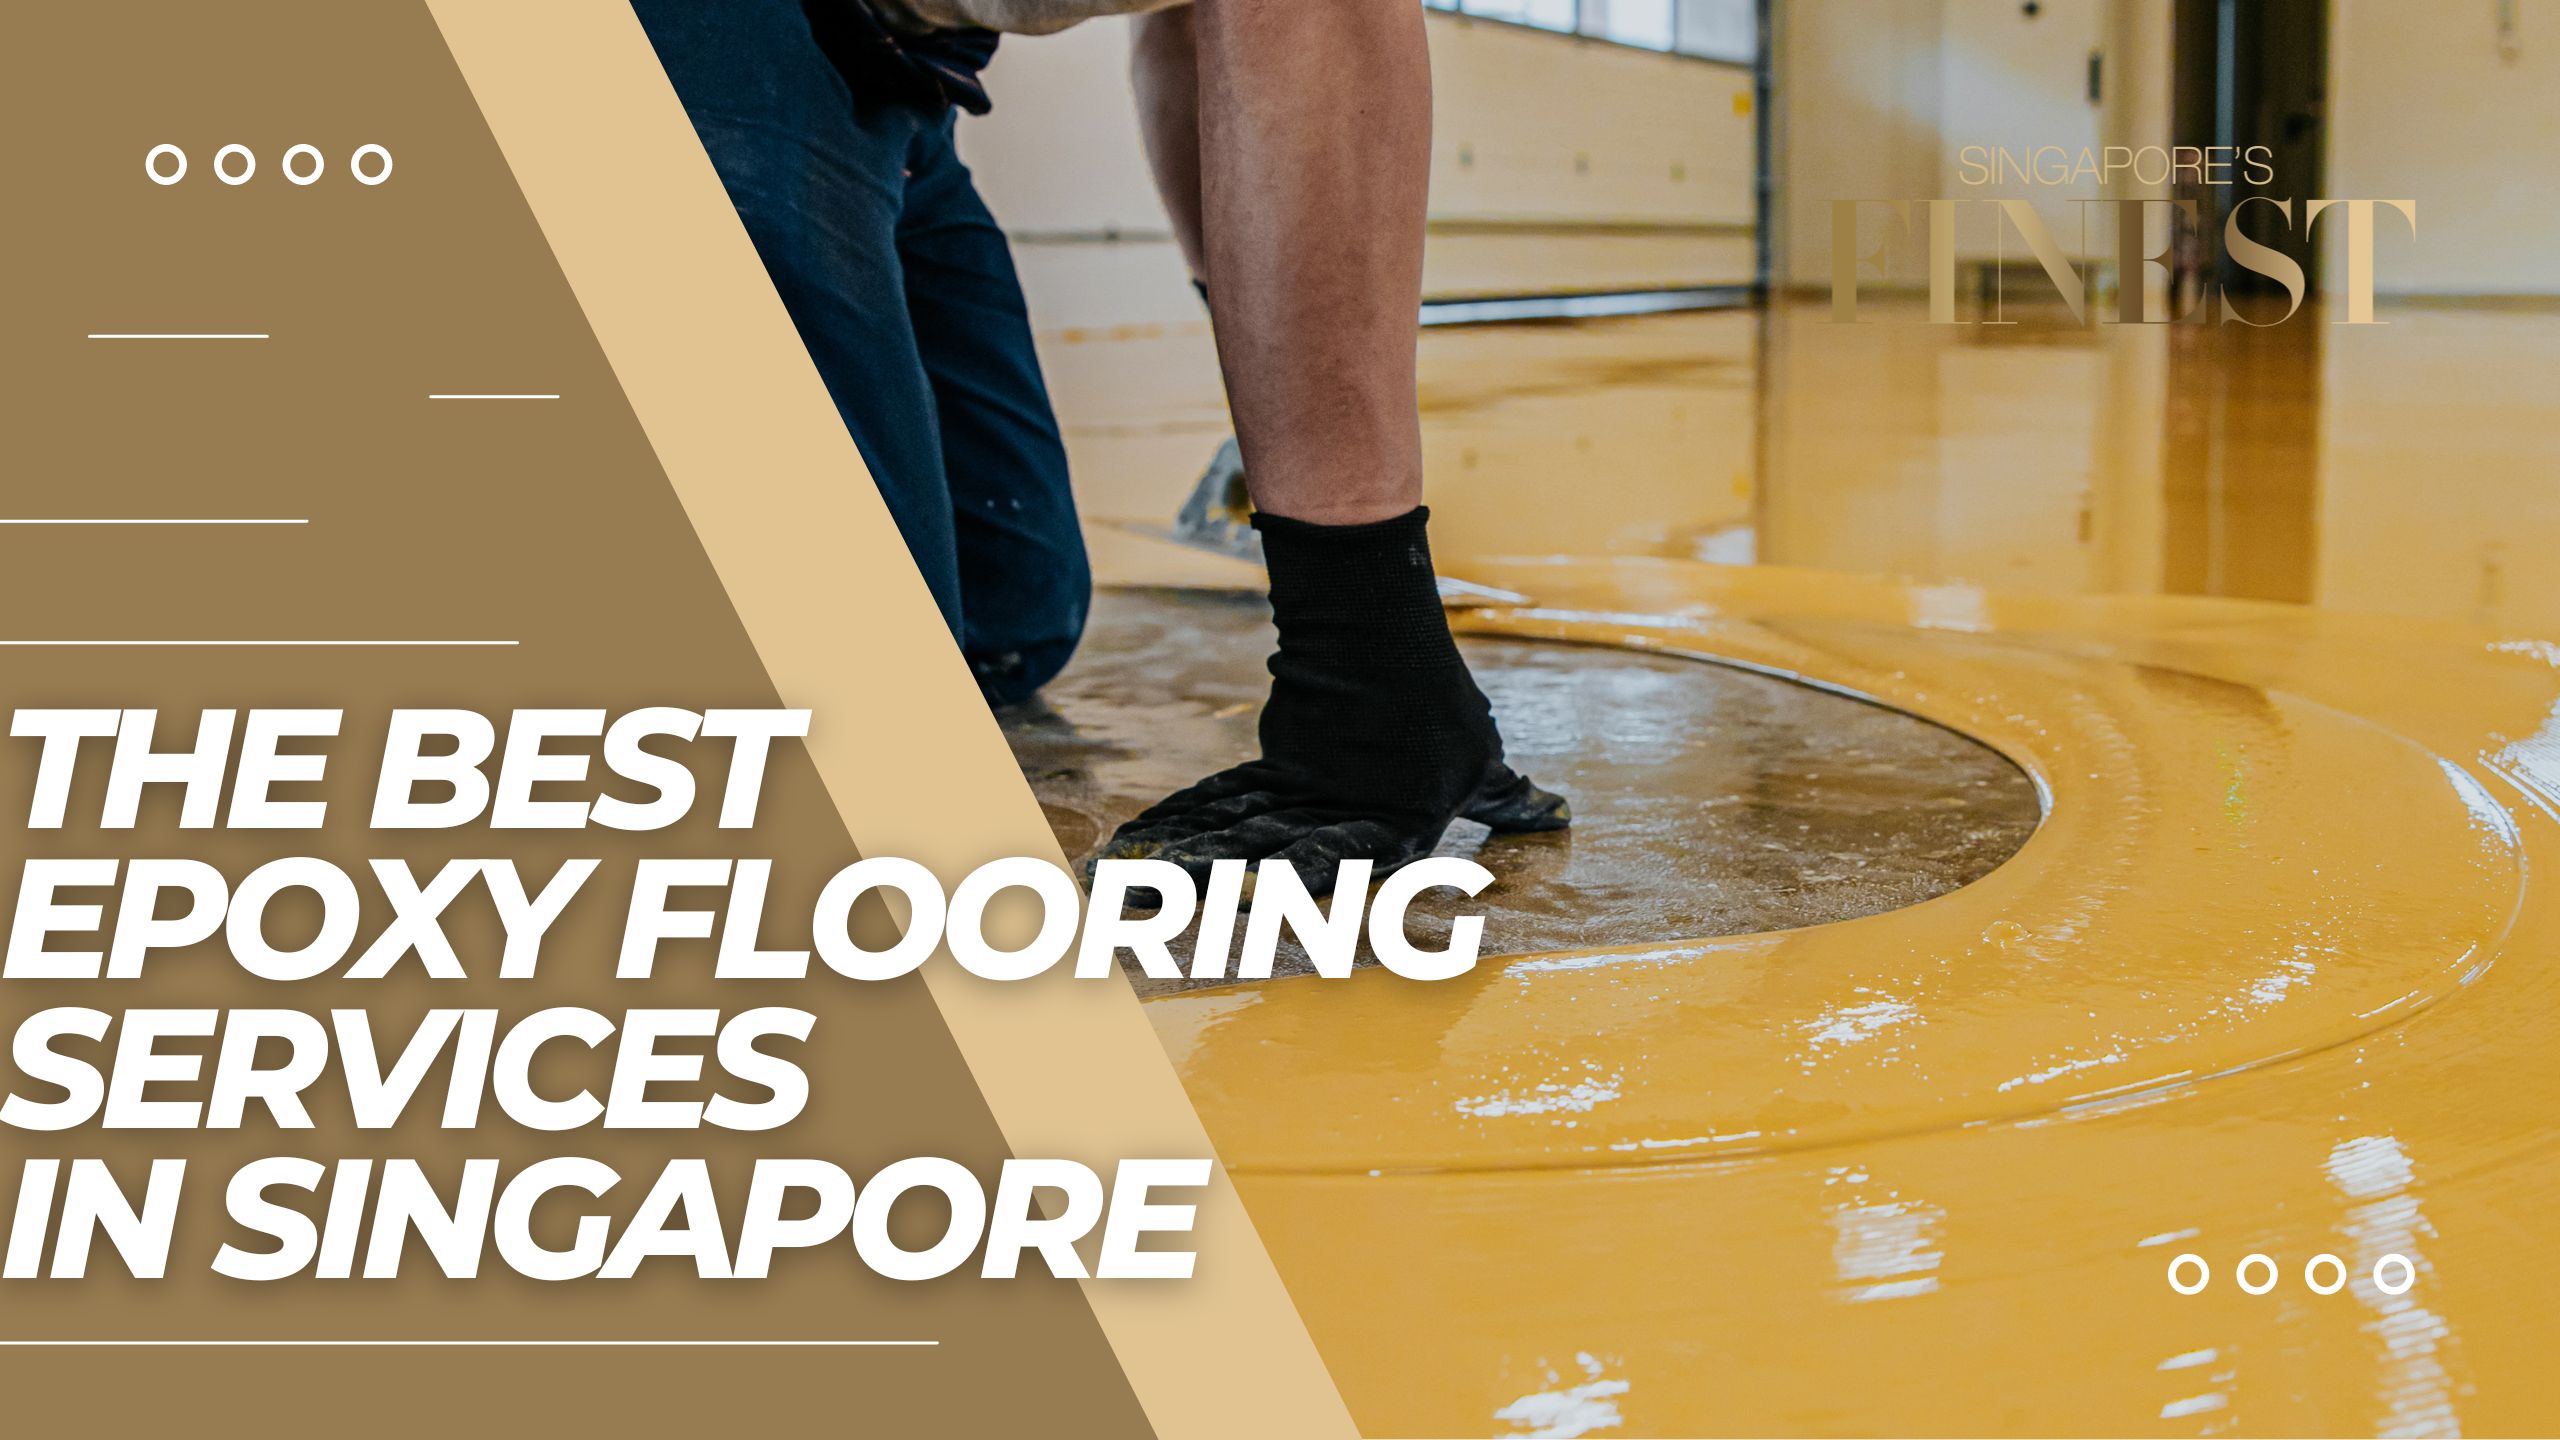 The Finest Epoxy Flooring Services in Singapore